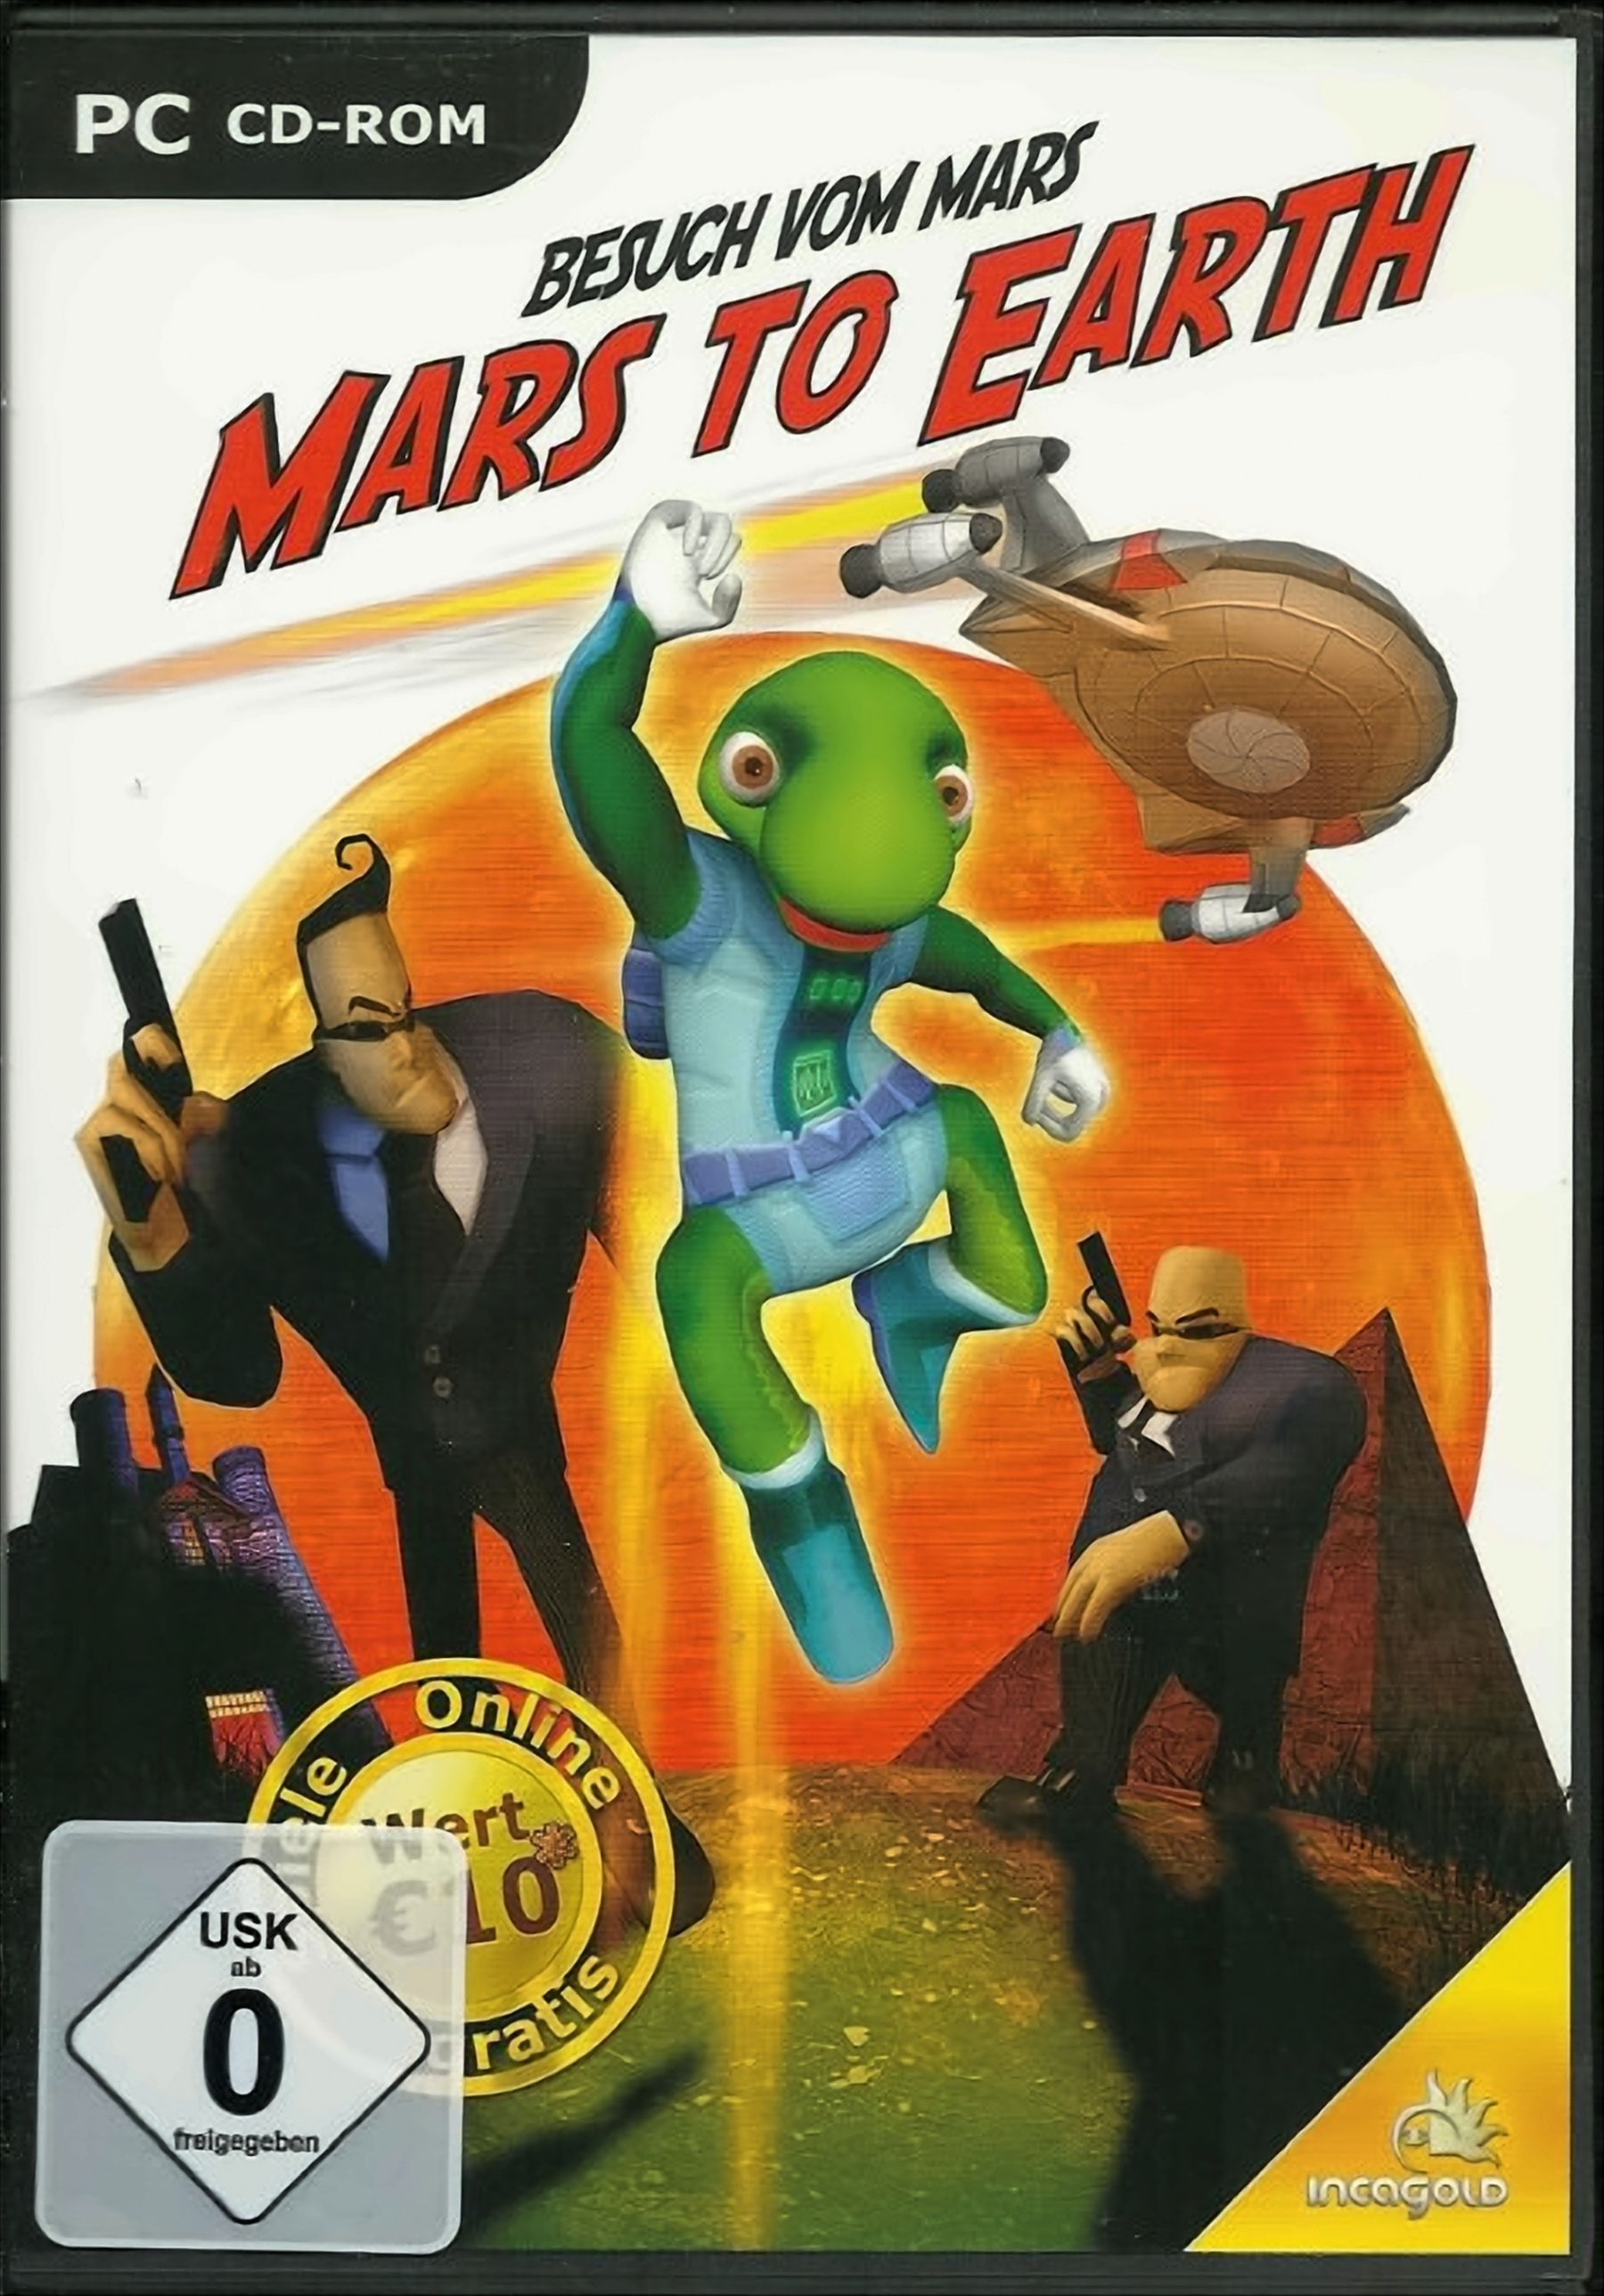 Mars to [PC] Mars vom - Besuch - Earth